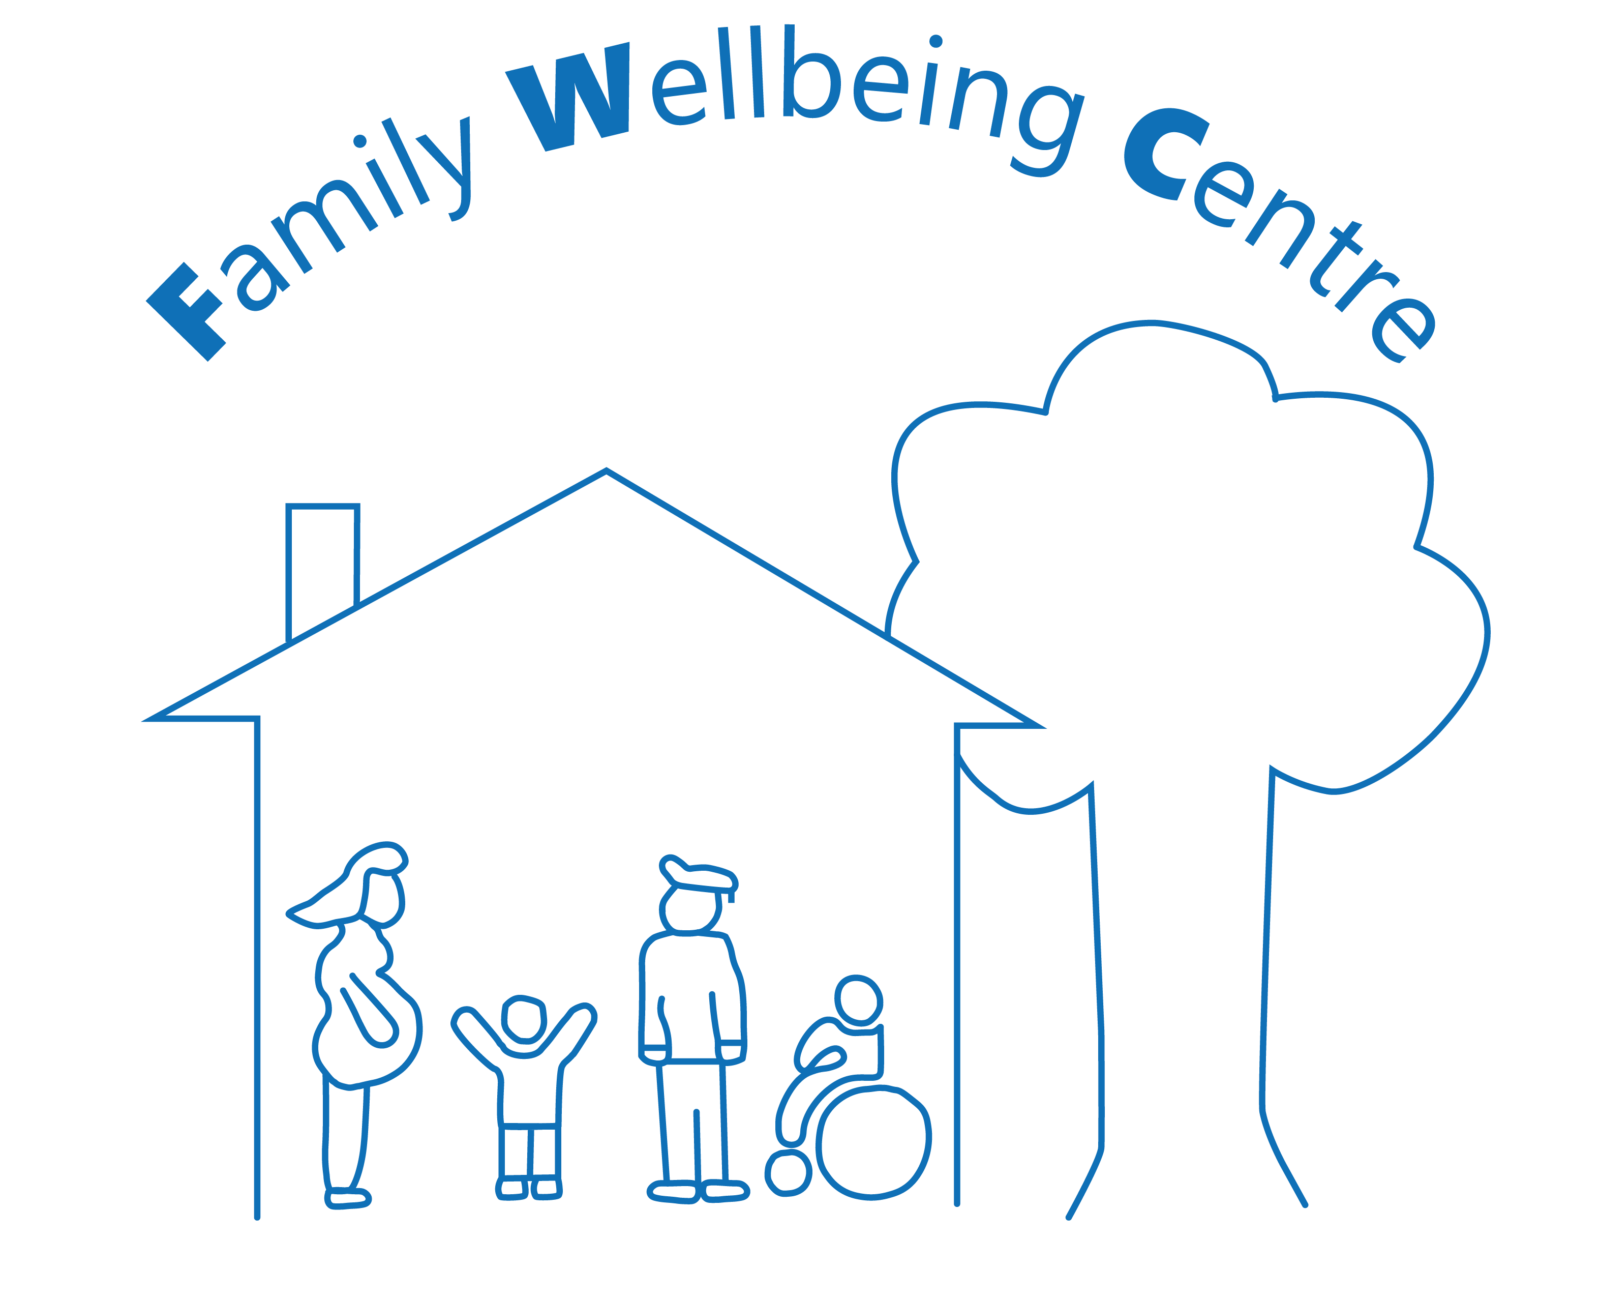 Brent Family Wellbeing Centres logo